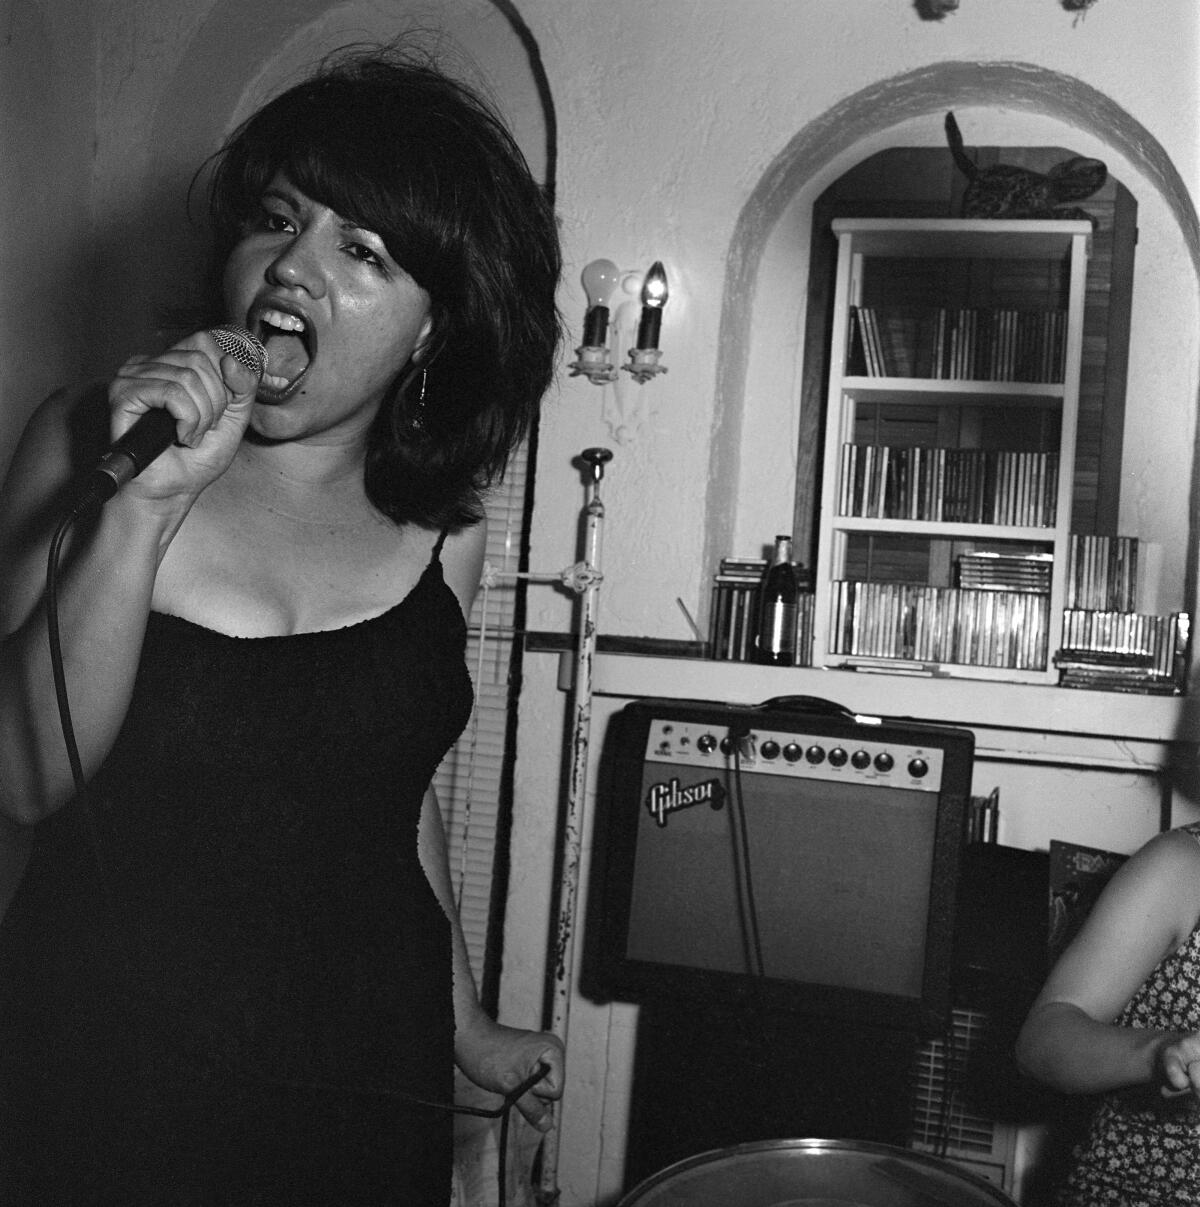 A woman in a black dress sings into a microphone before an amplifier set up in an apartment.